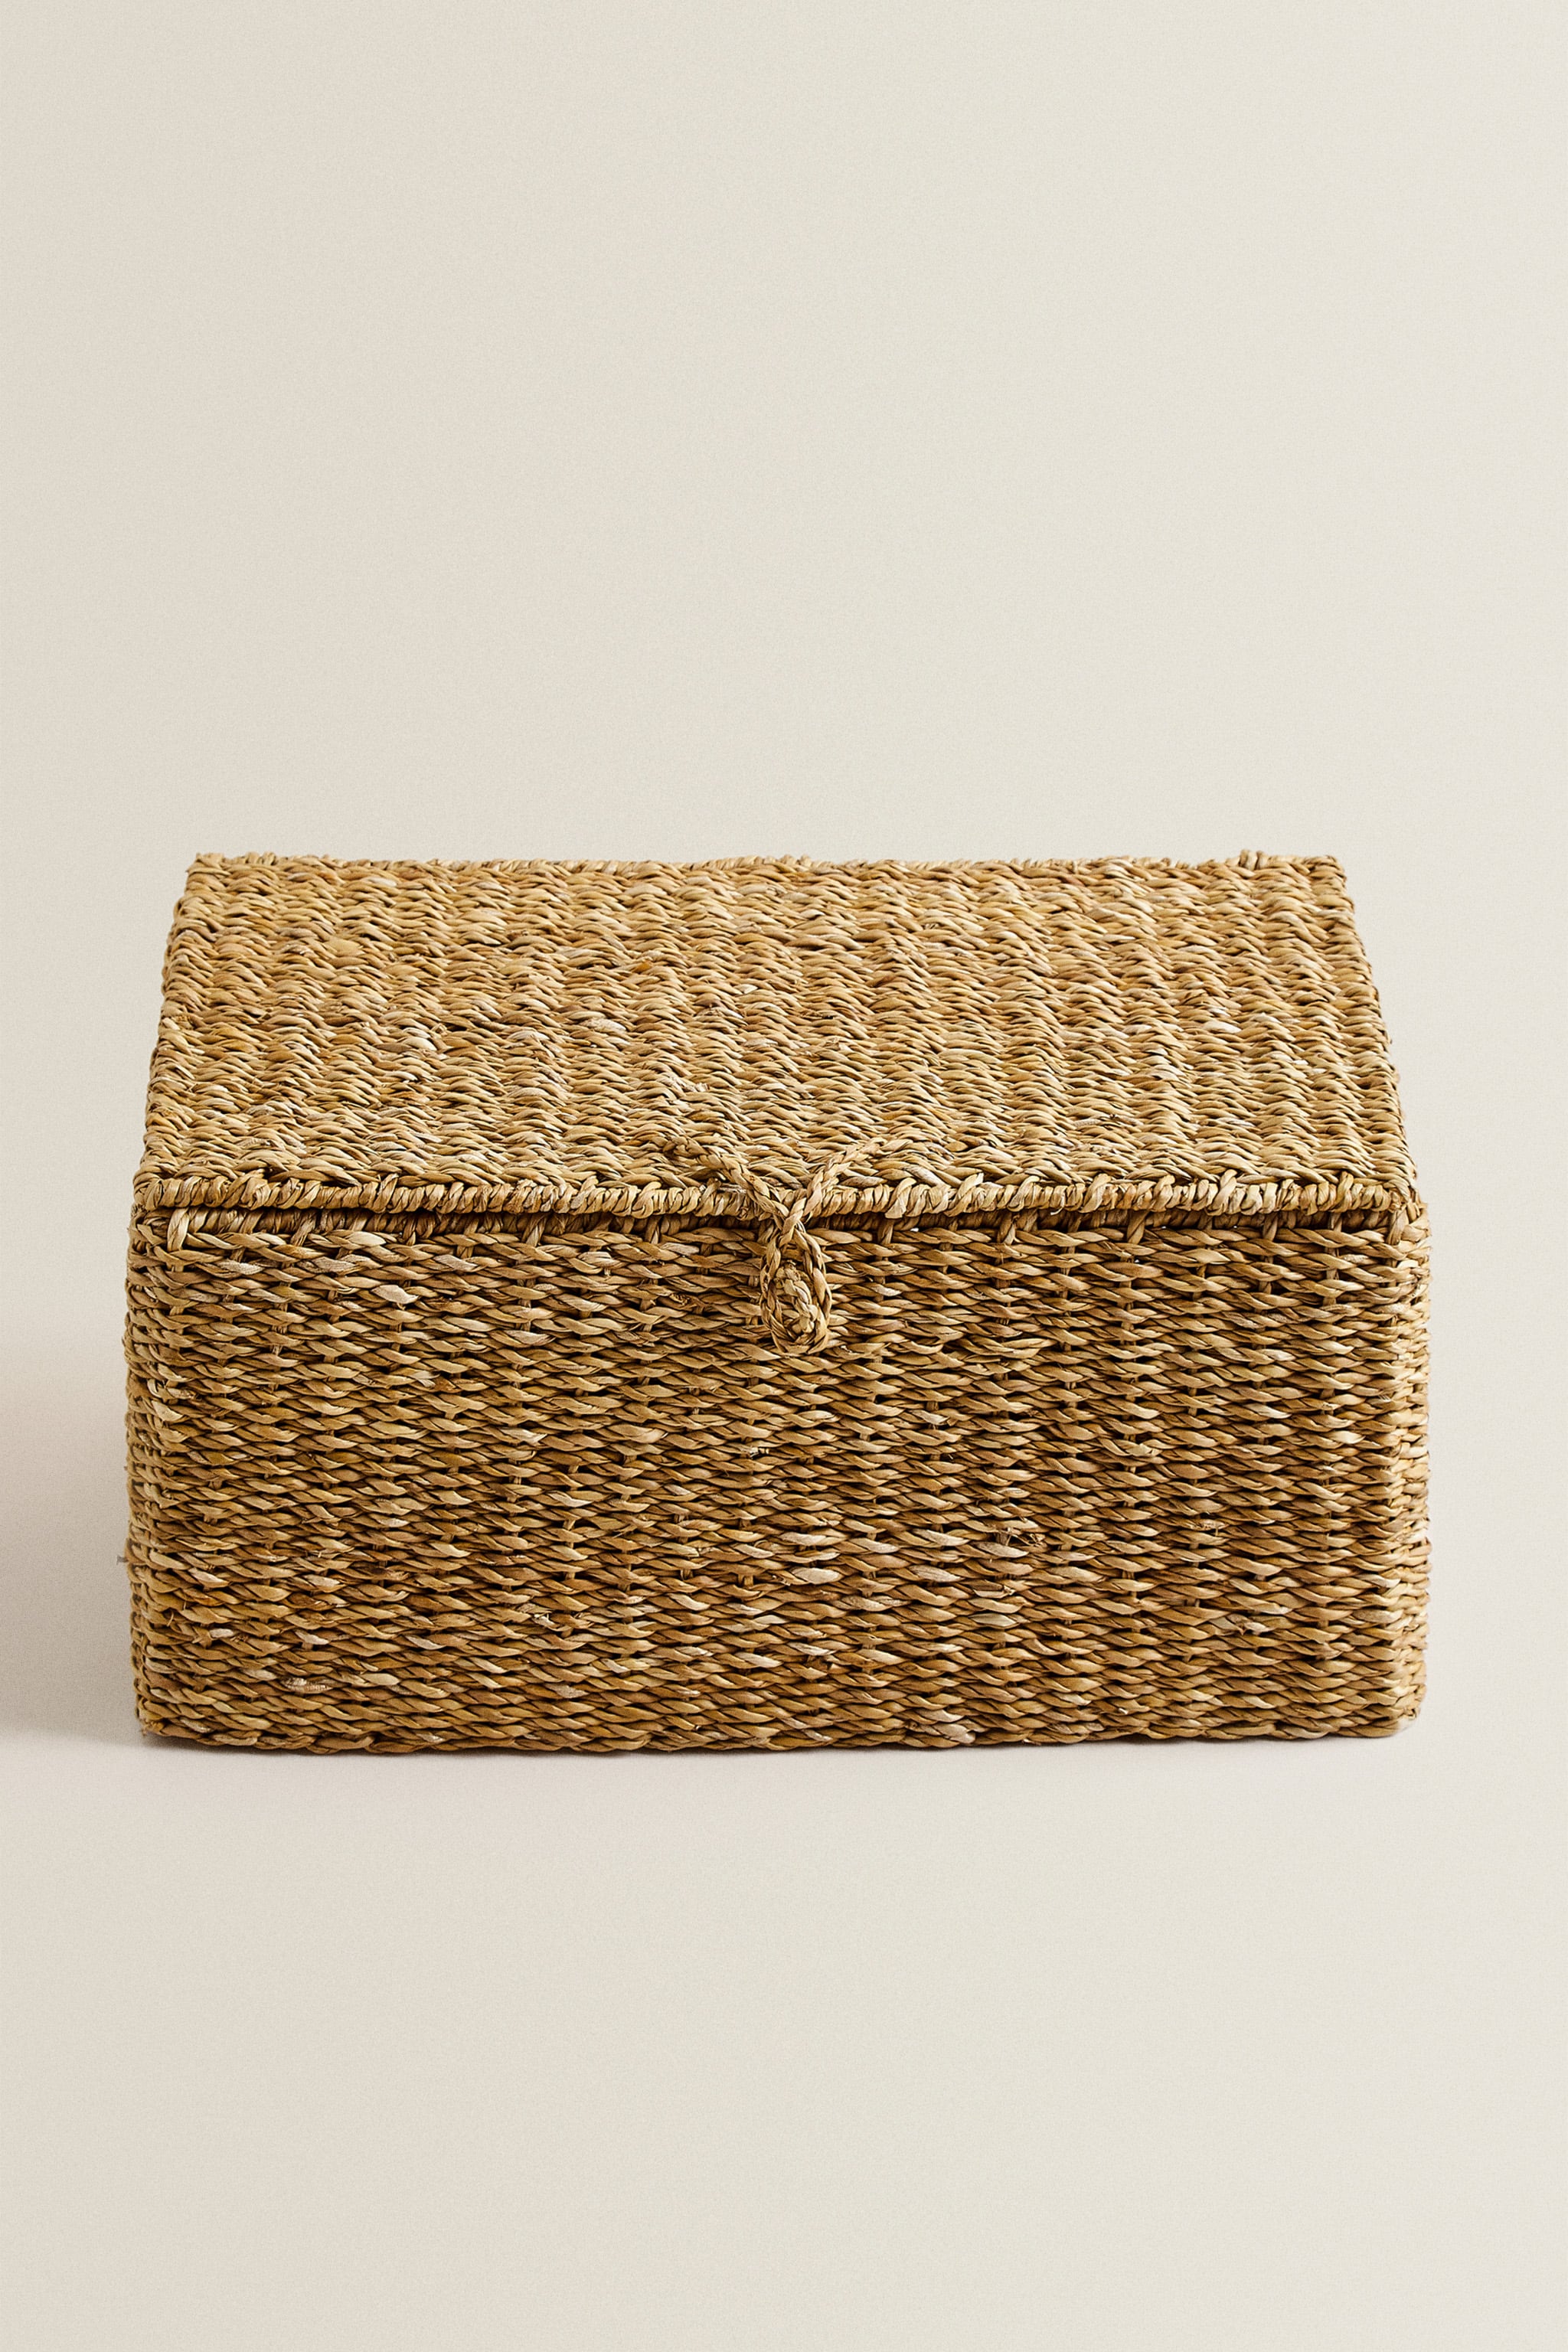 SEAGRASS BASKET WITH LID